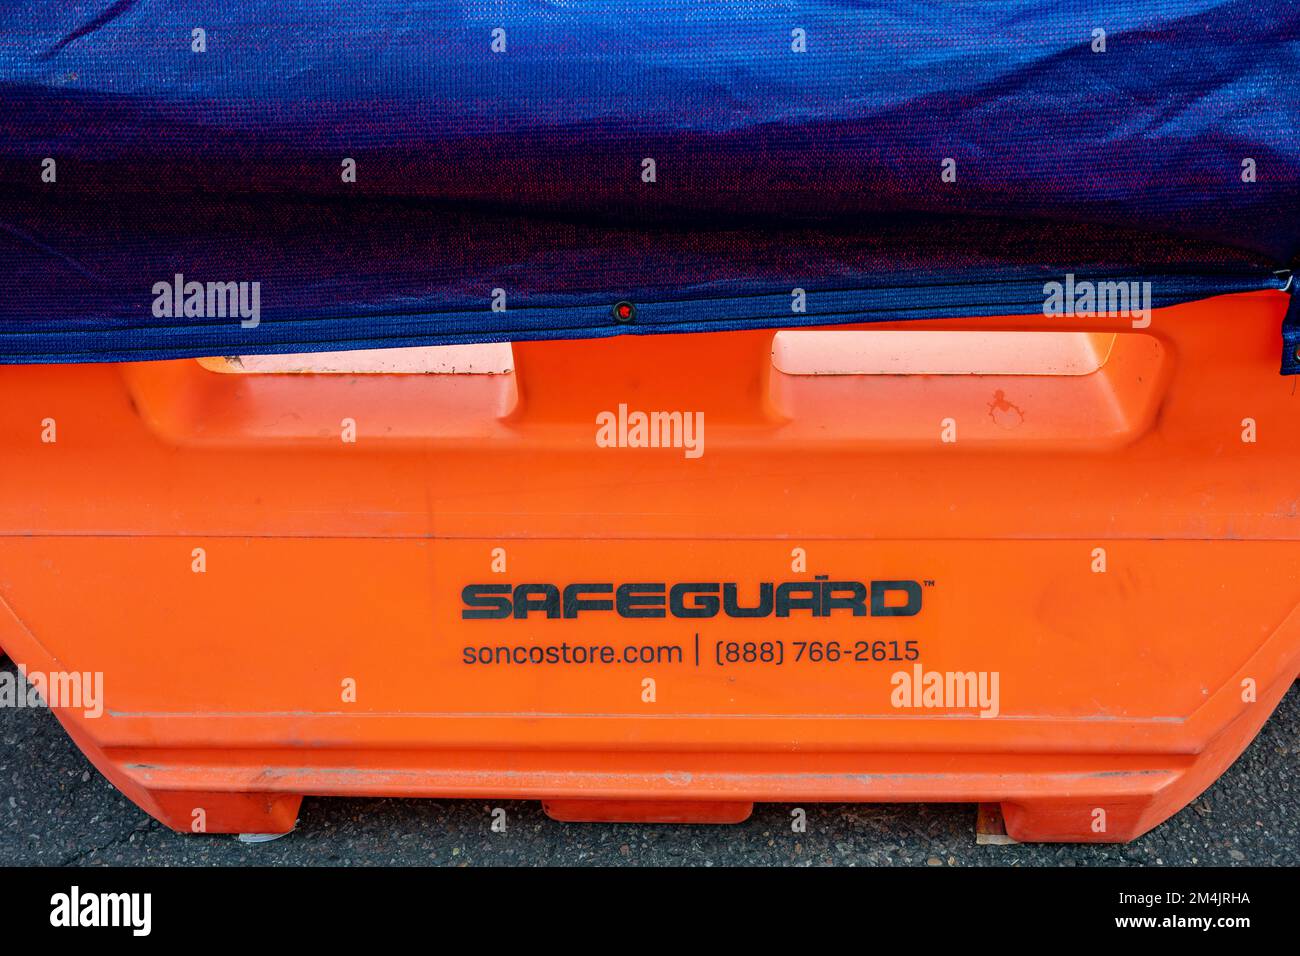 Phoenix, AZ - Nov. 11, 2022: Sonco's Safeguard is a water filled jersey barrier for traffic control at construction sites and work zones made of  high Stock Photo